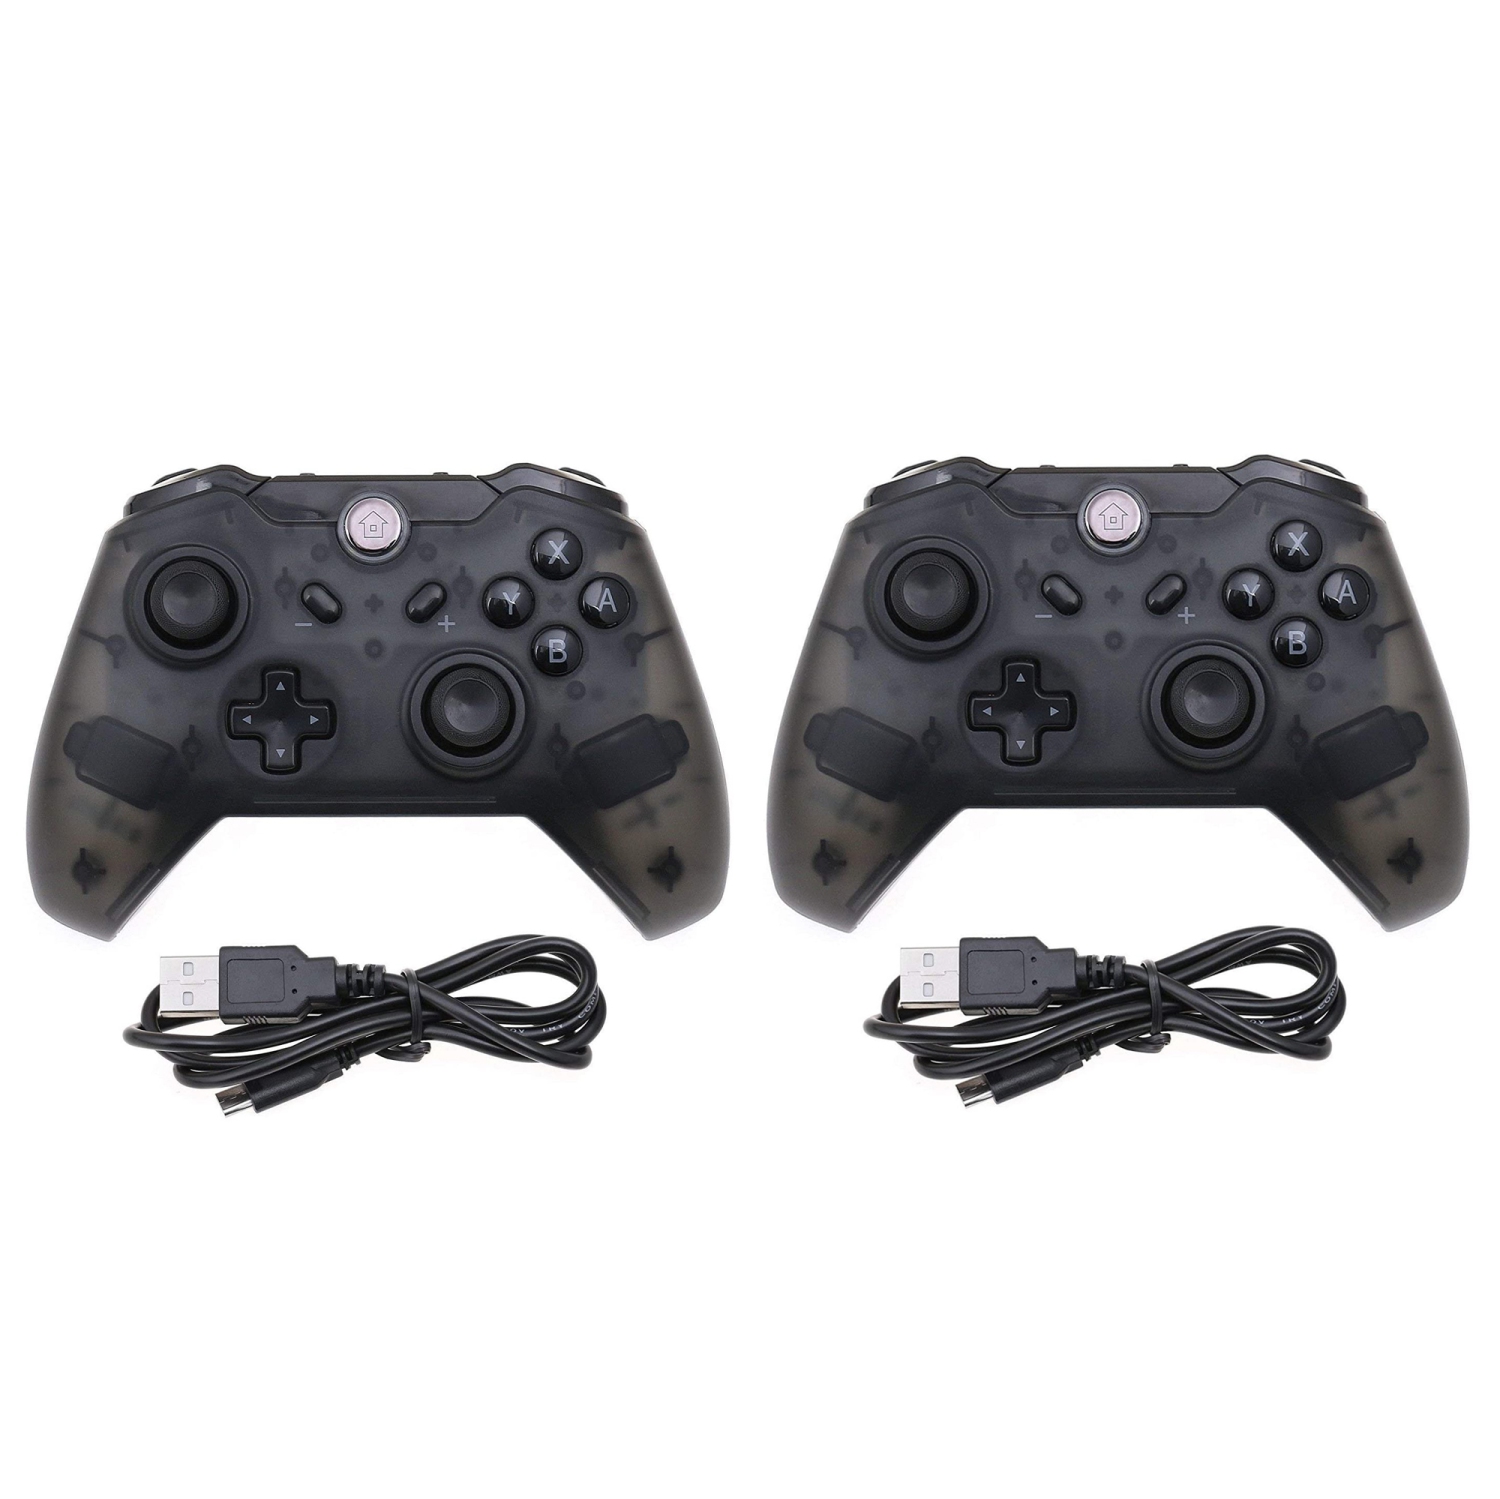 2 Wireless Pro Gaming Controller Gamepad Joypad Remote for Nintendo Switch Console Version